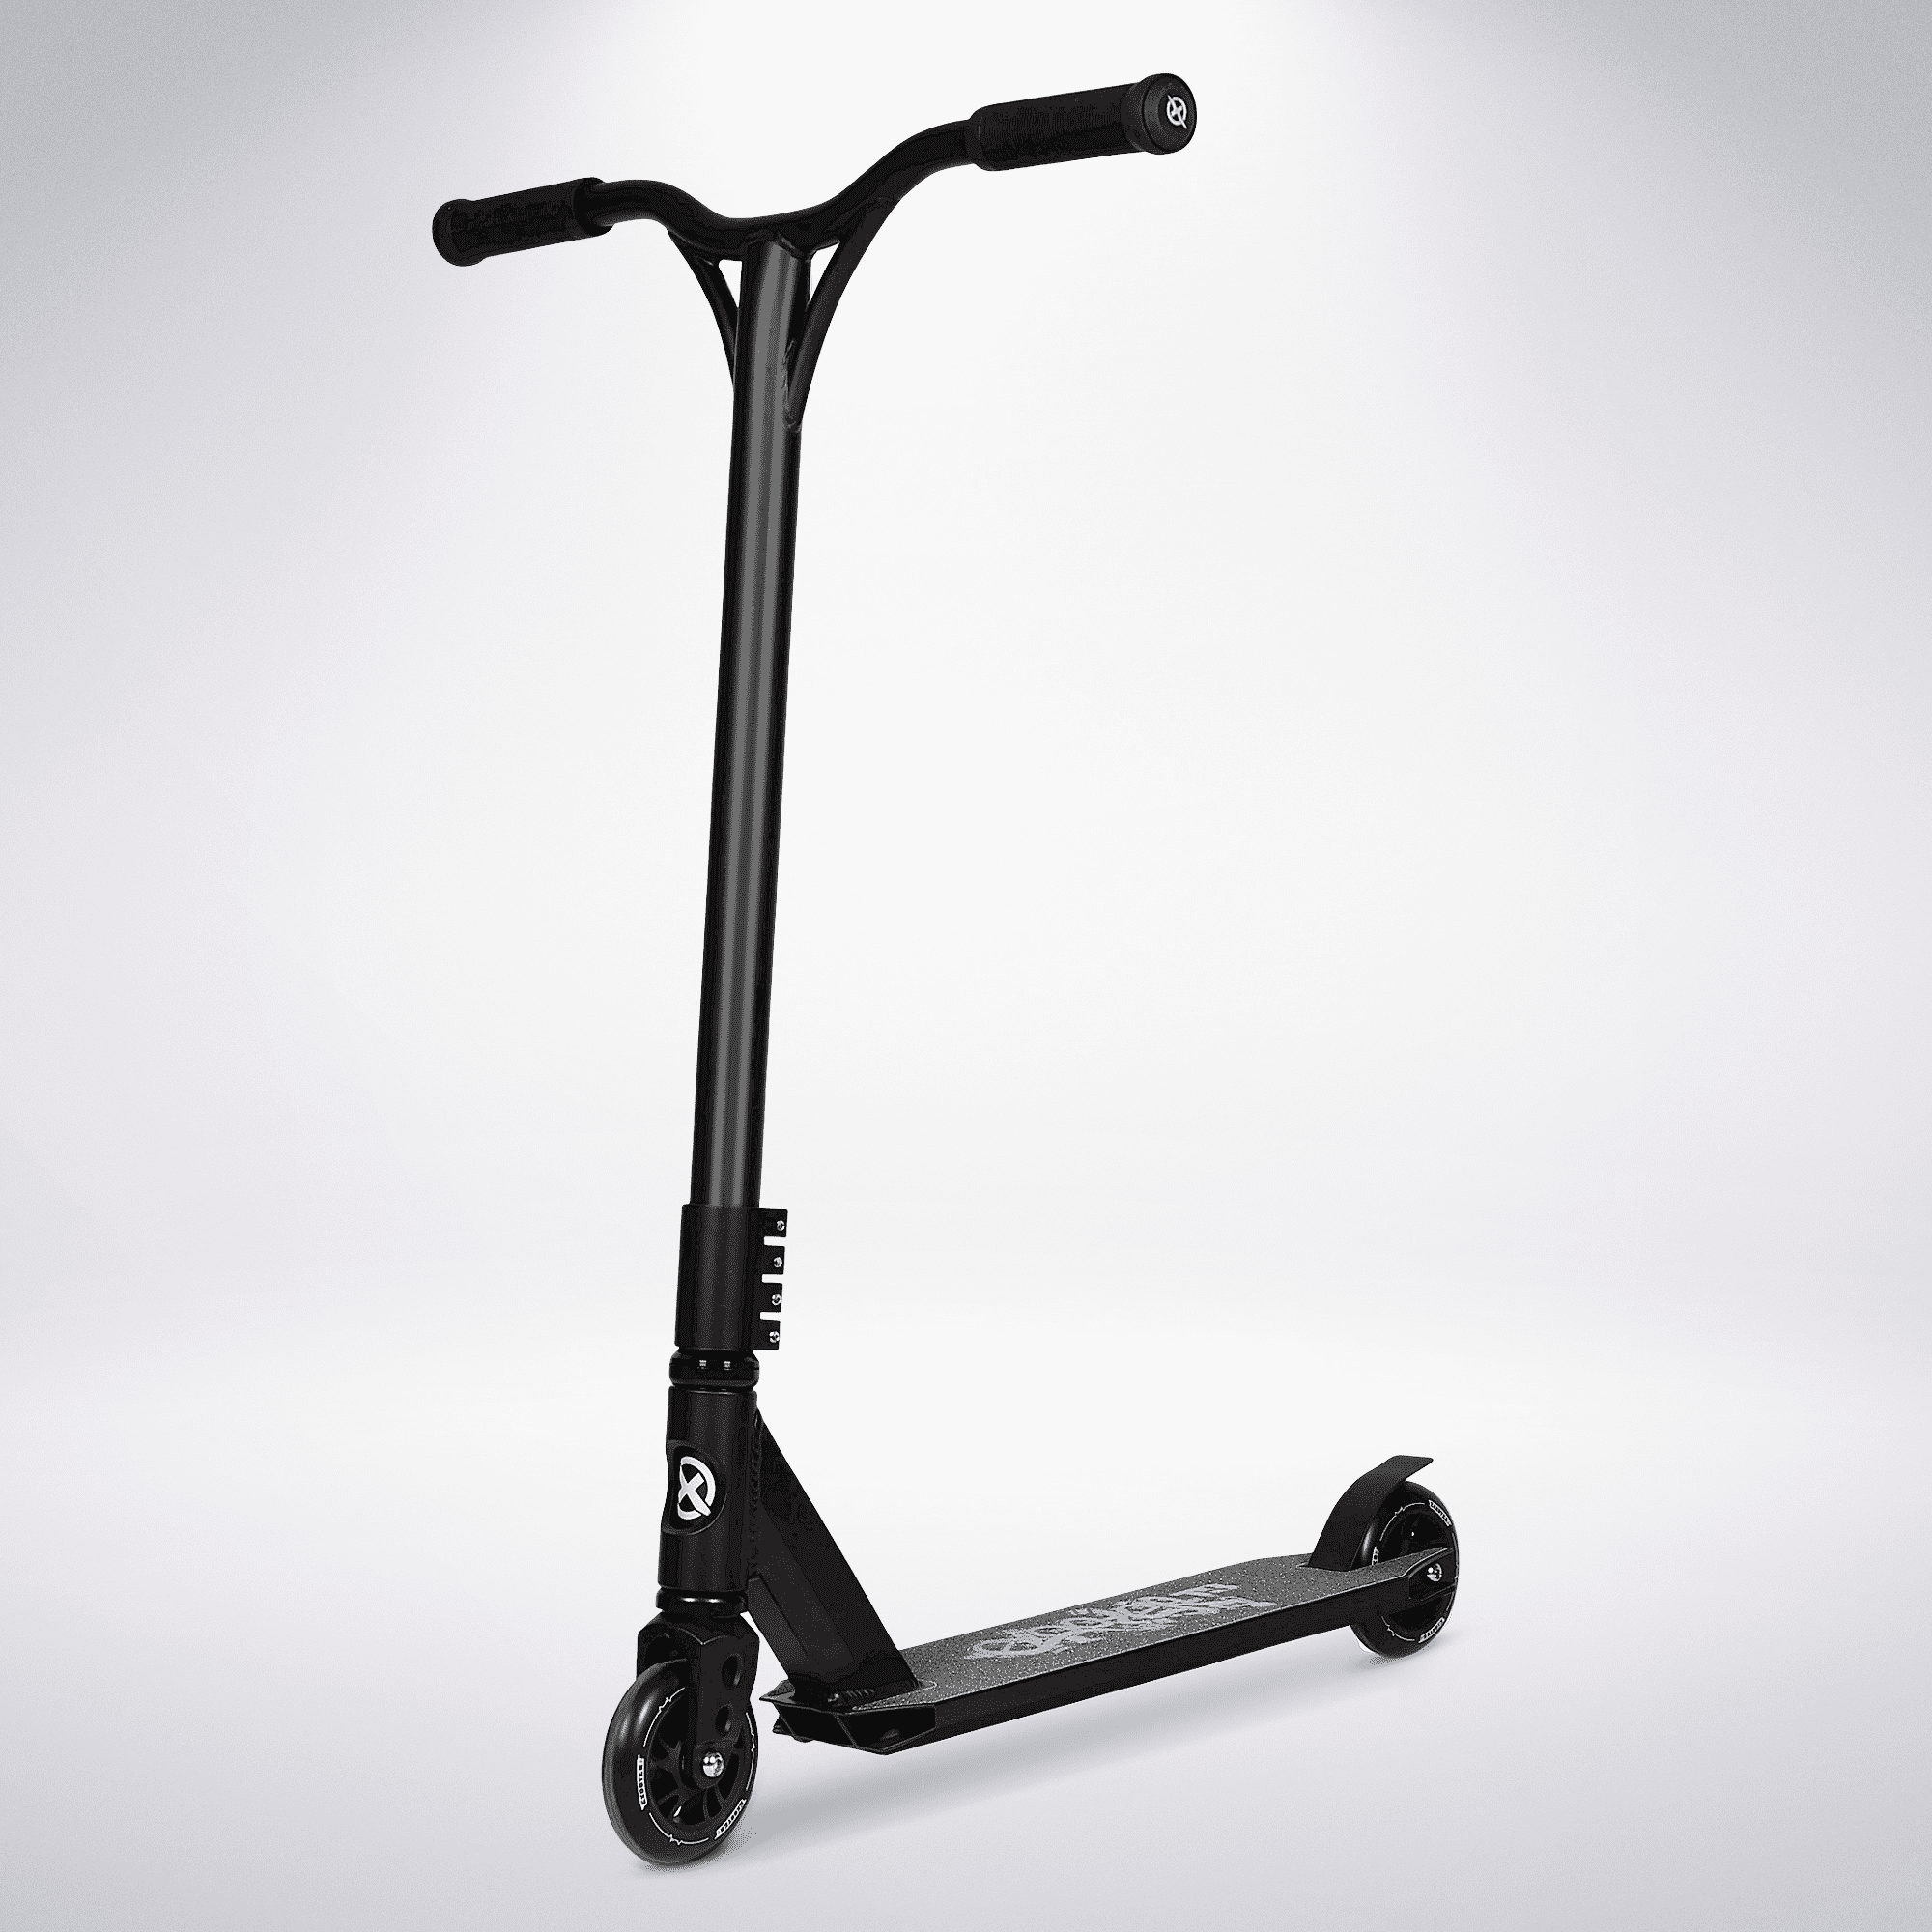 EXOOTER T3 Trick Scooter with 110mm Aluminum Core Wheels. 